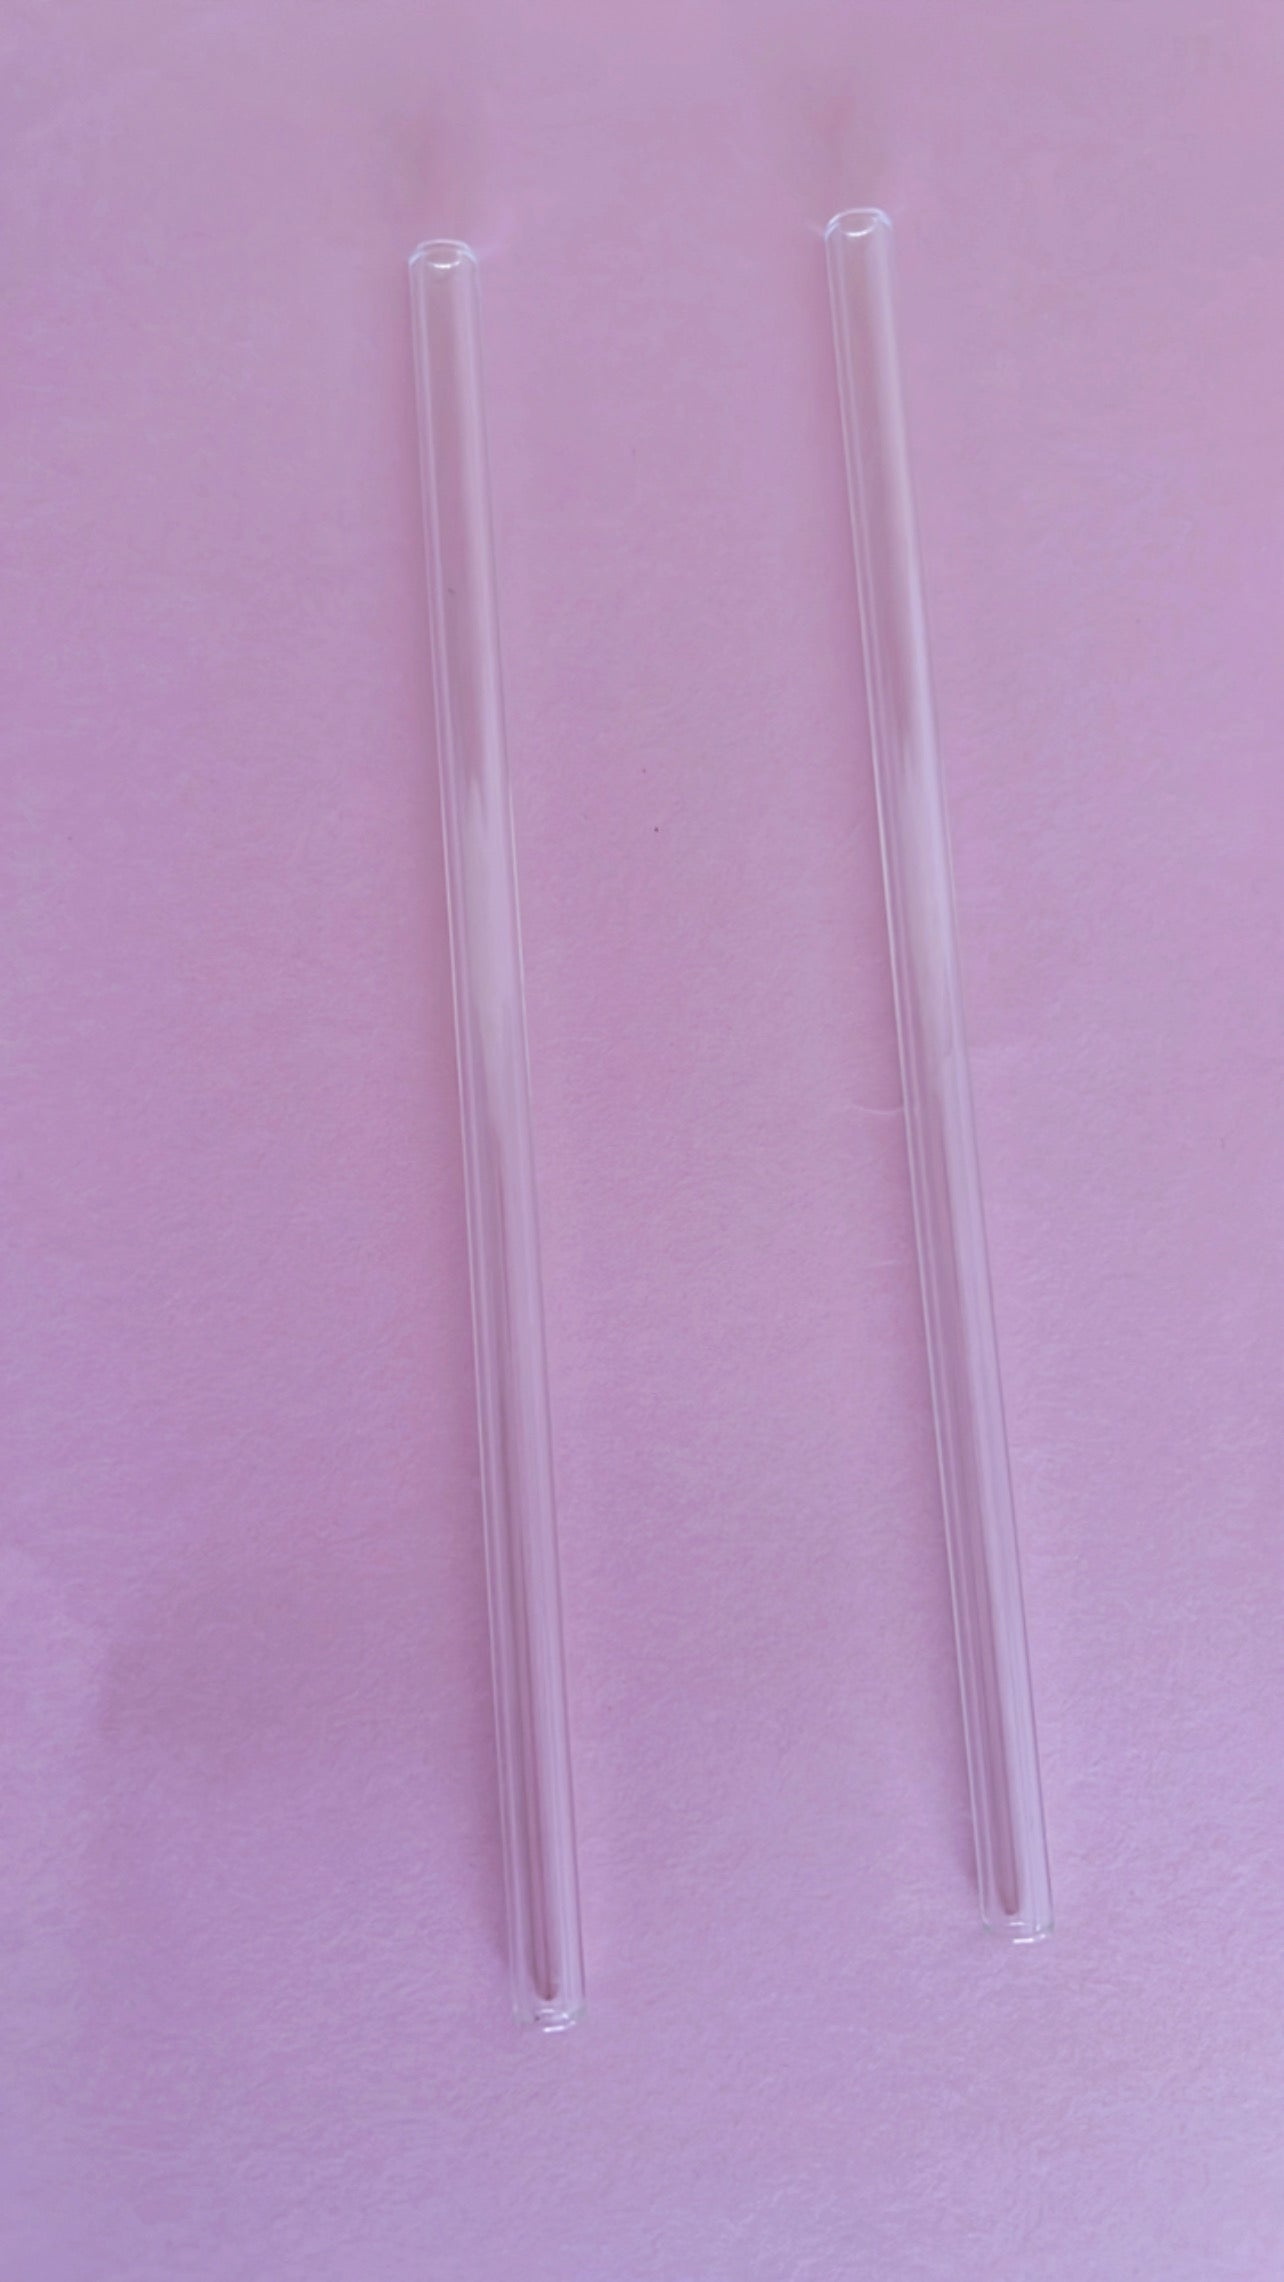 Clear Glass Straws are available in 2 styles